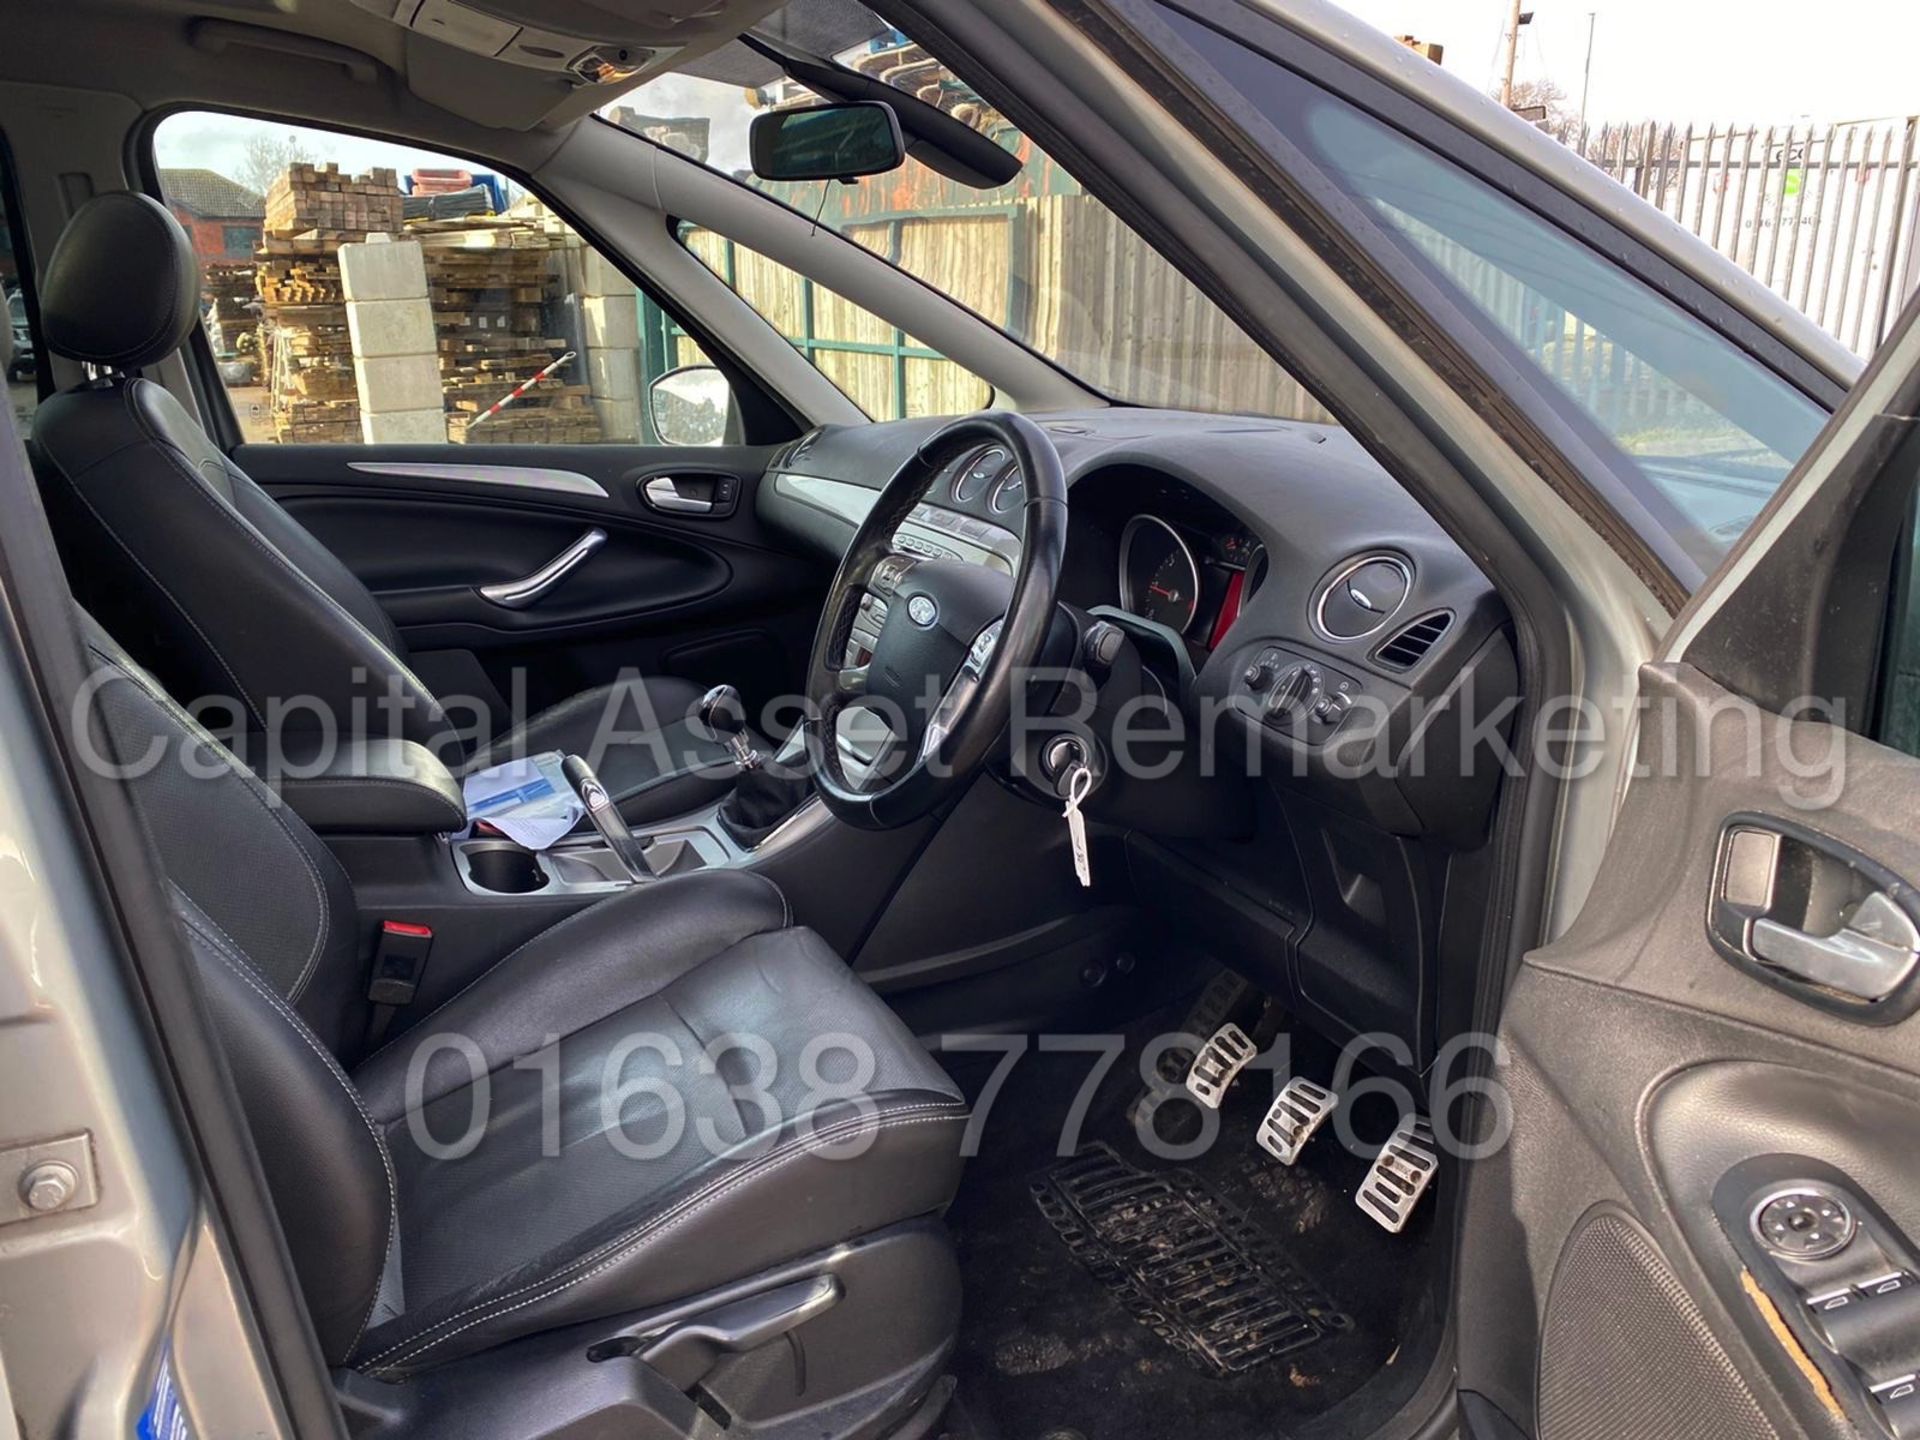 (On Sale) FORD S-MAX *ZETEC EDITION* 7 SEATER MPV (2010 MODEL) '1.8 TDCI - 6 SPEED' *A/C* (NO VAT) - Image 8 of 16